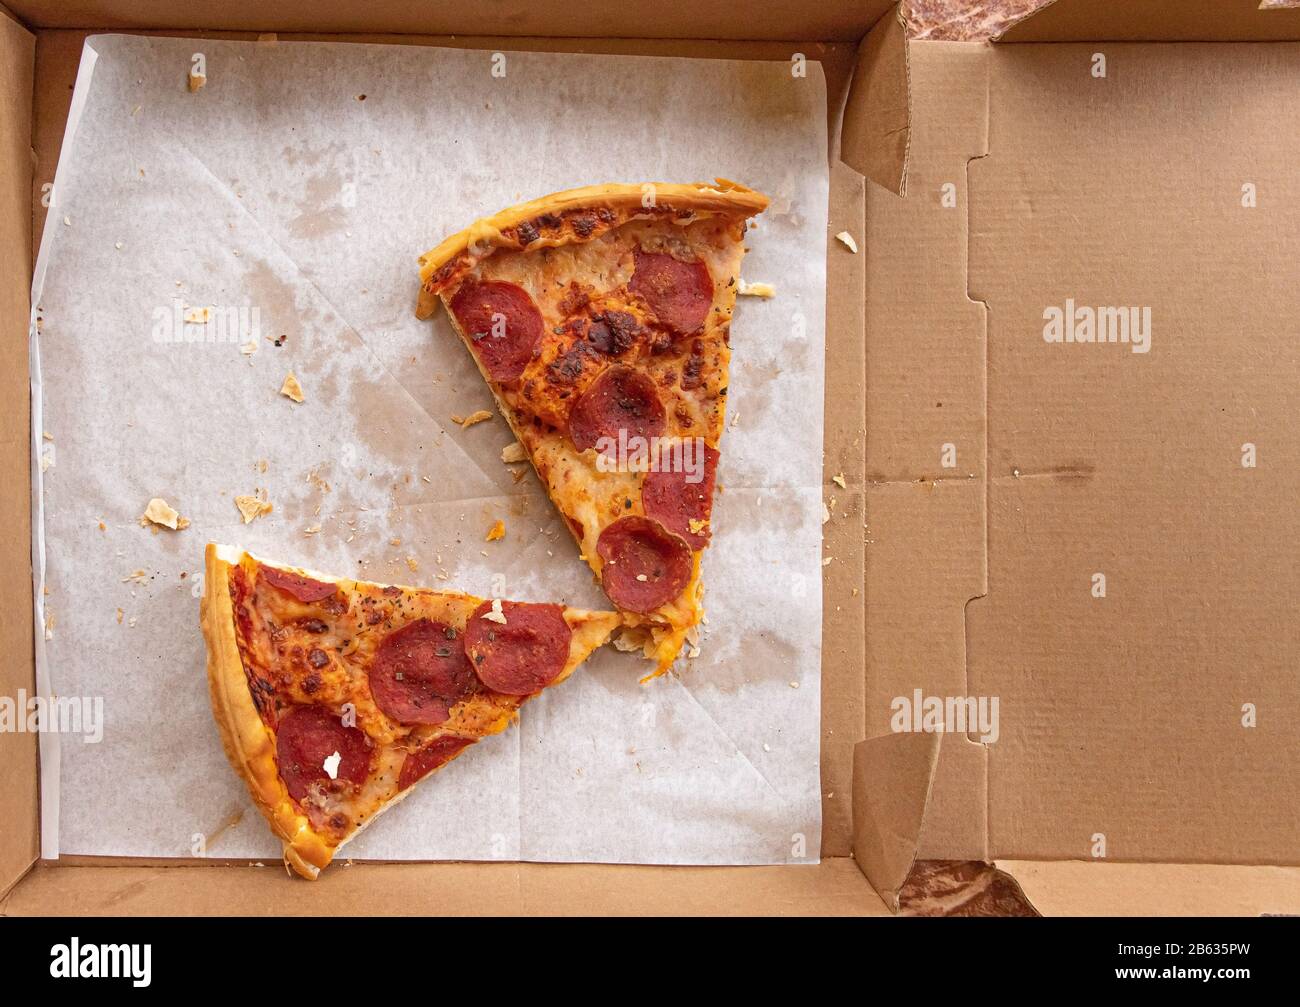 https://c8.alamy.com/comp/2B635PW/stale-leftover-pizza-slices-in-pizza-delivery-box-2B635PW.jpg